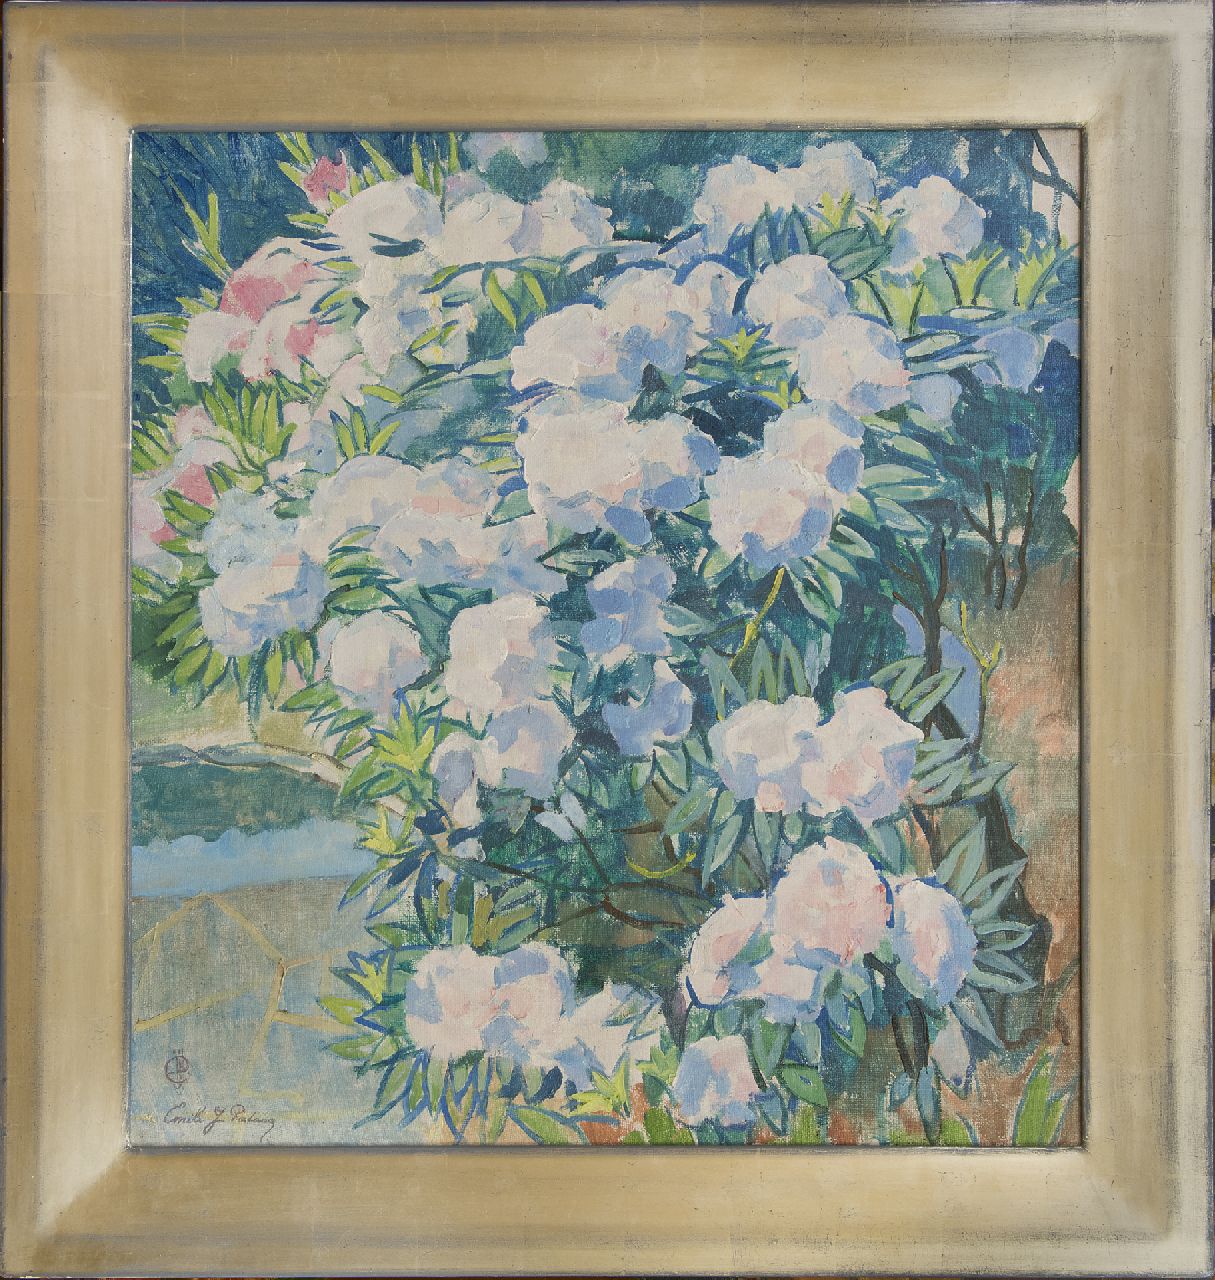 Patoux E.J.  | Emile Joseph Patoux | Paintings offered for sale | White Azalea japonica, oil on canvas 75.8 x 70.5 cm, signed l.l. with monogram and in full